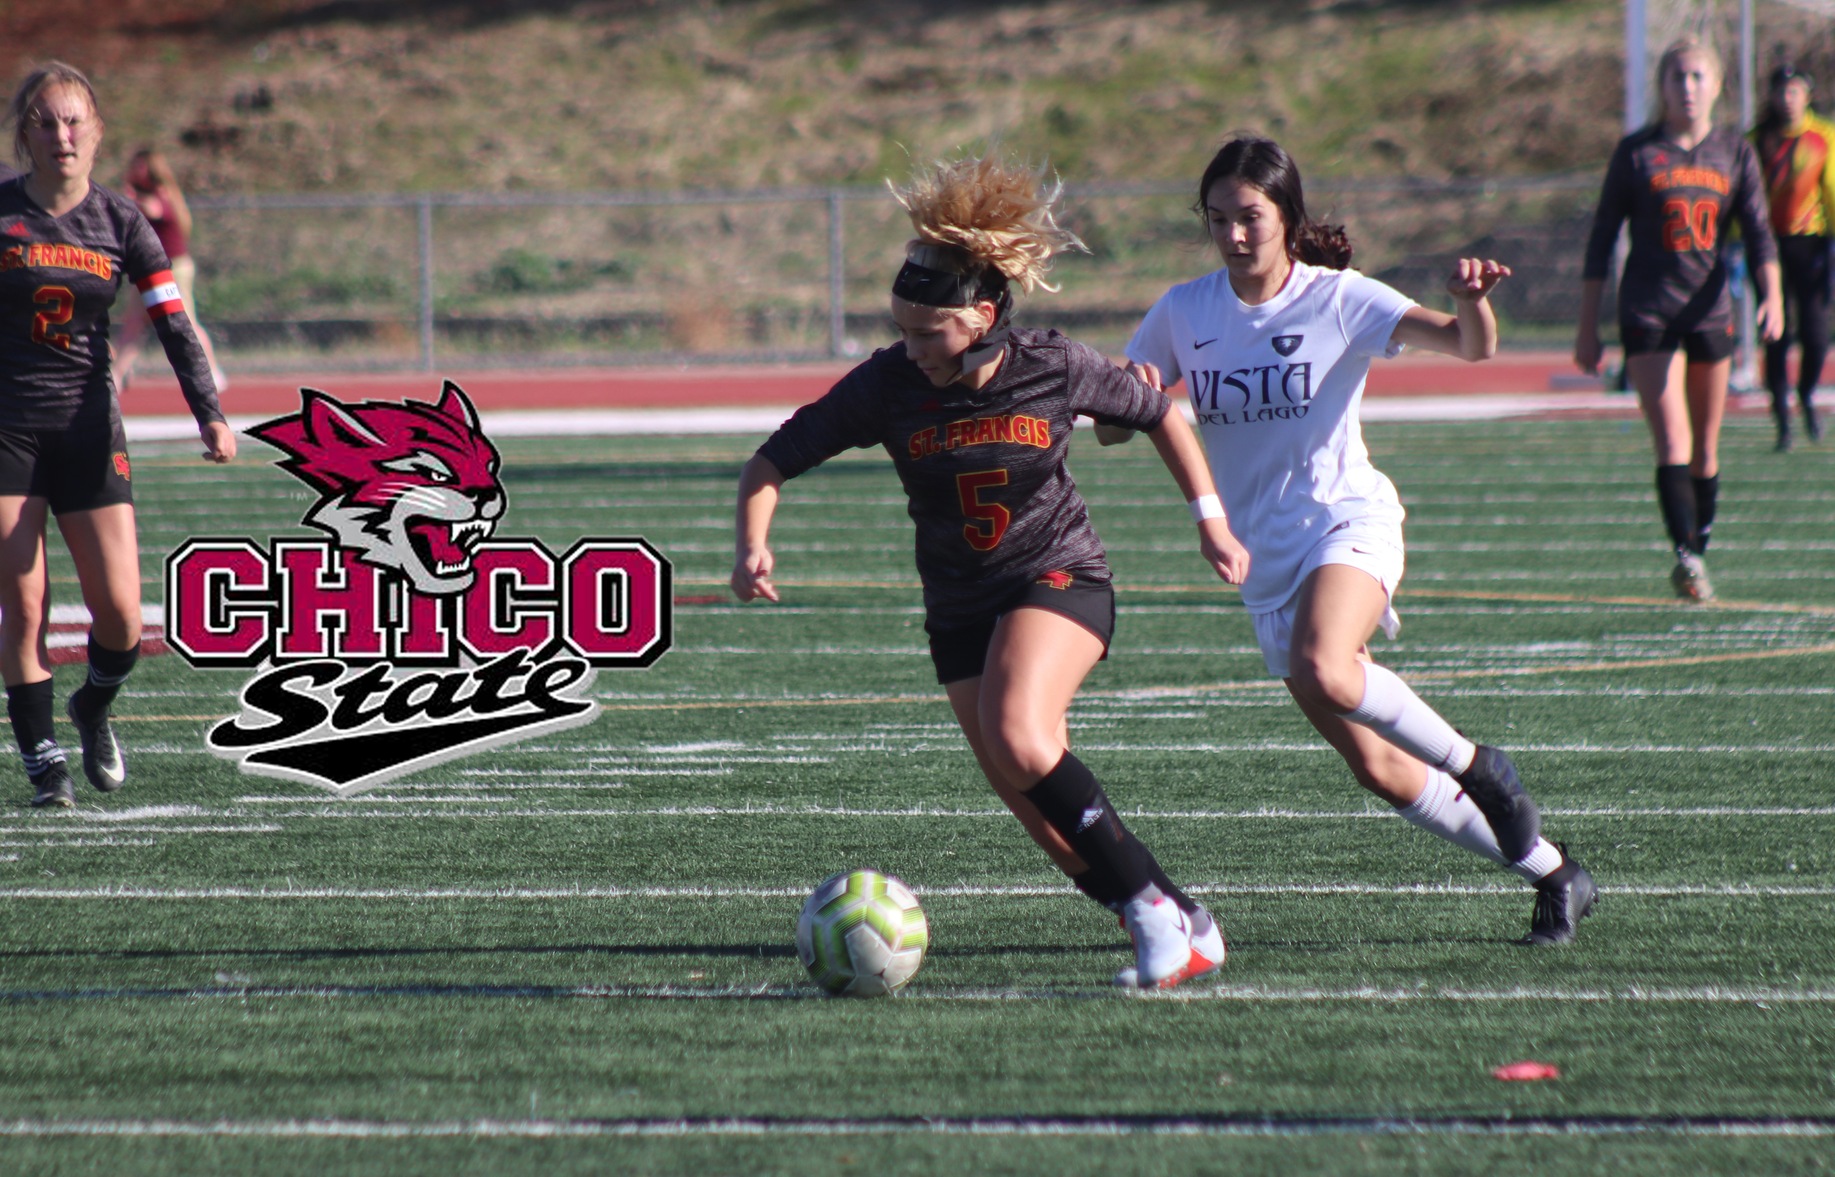 Soccer’s Piatanesi to Play at Chico State